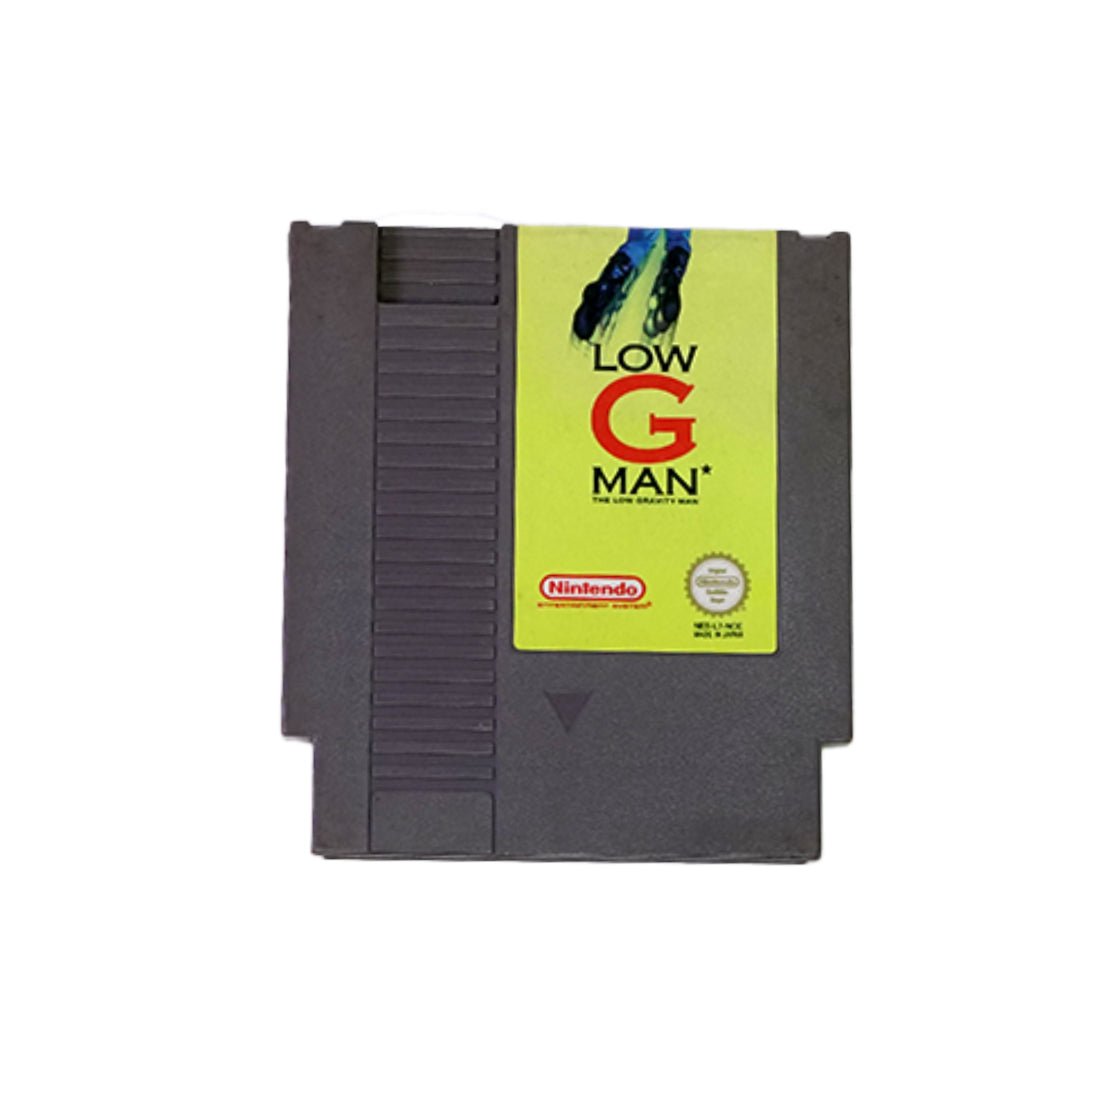 (Pre-Owned) Low G Man: The Low Gravity Man Game - NES - ريترو - Store 974 | ستور ٩٧٤